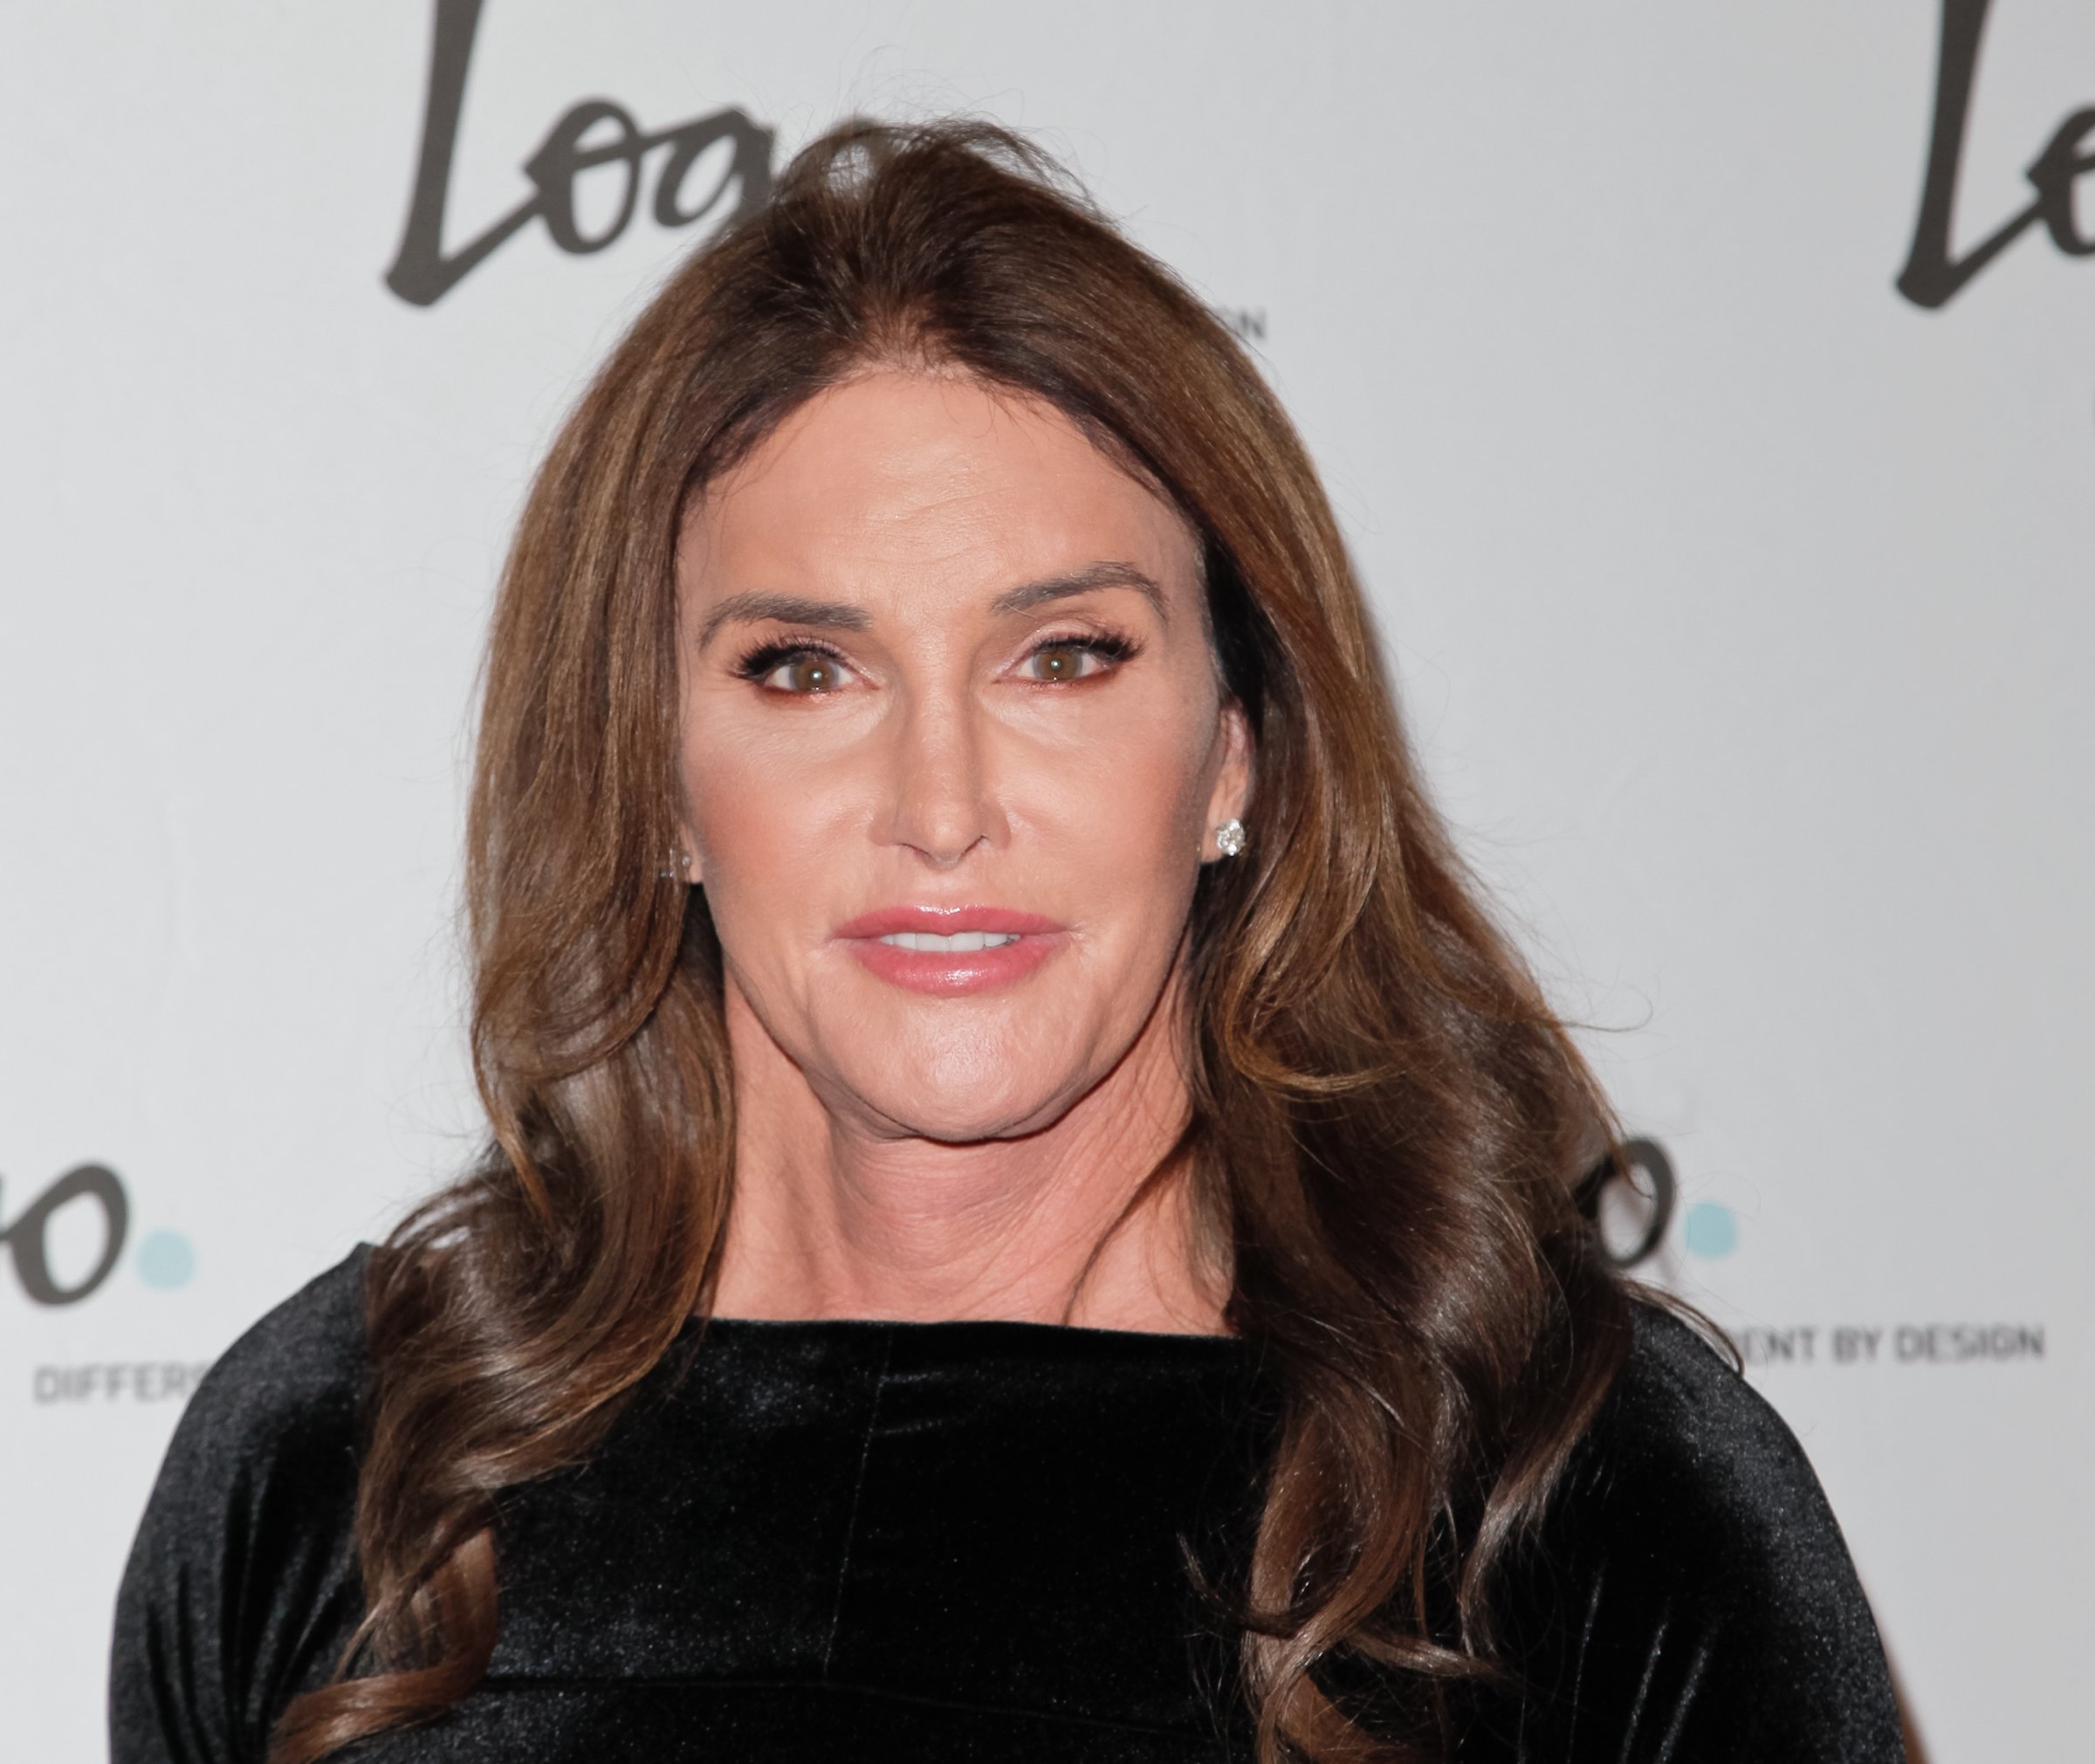 Caitlyn Jenner attends Logo TV's 'Beautiful As I Want To Be' web series launch party at The Standard Hotel on October 27, 2015 in Los Angeles, California.